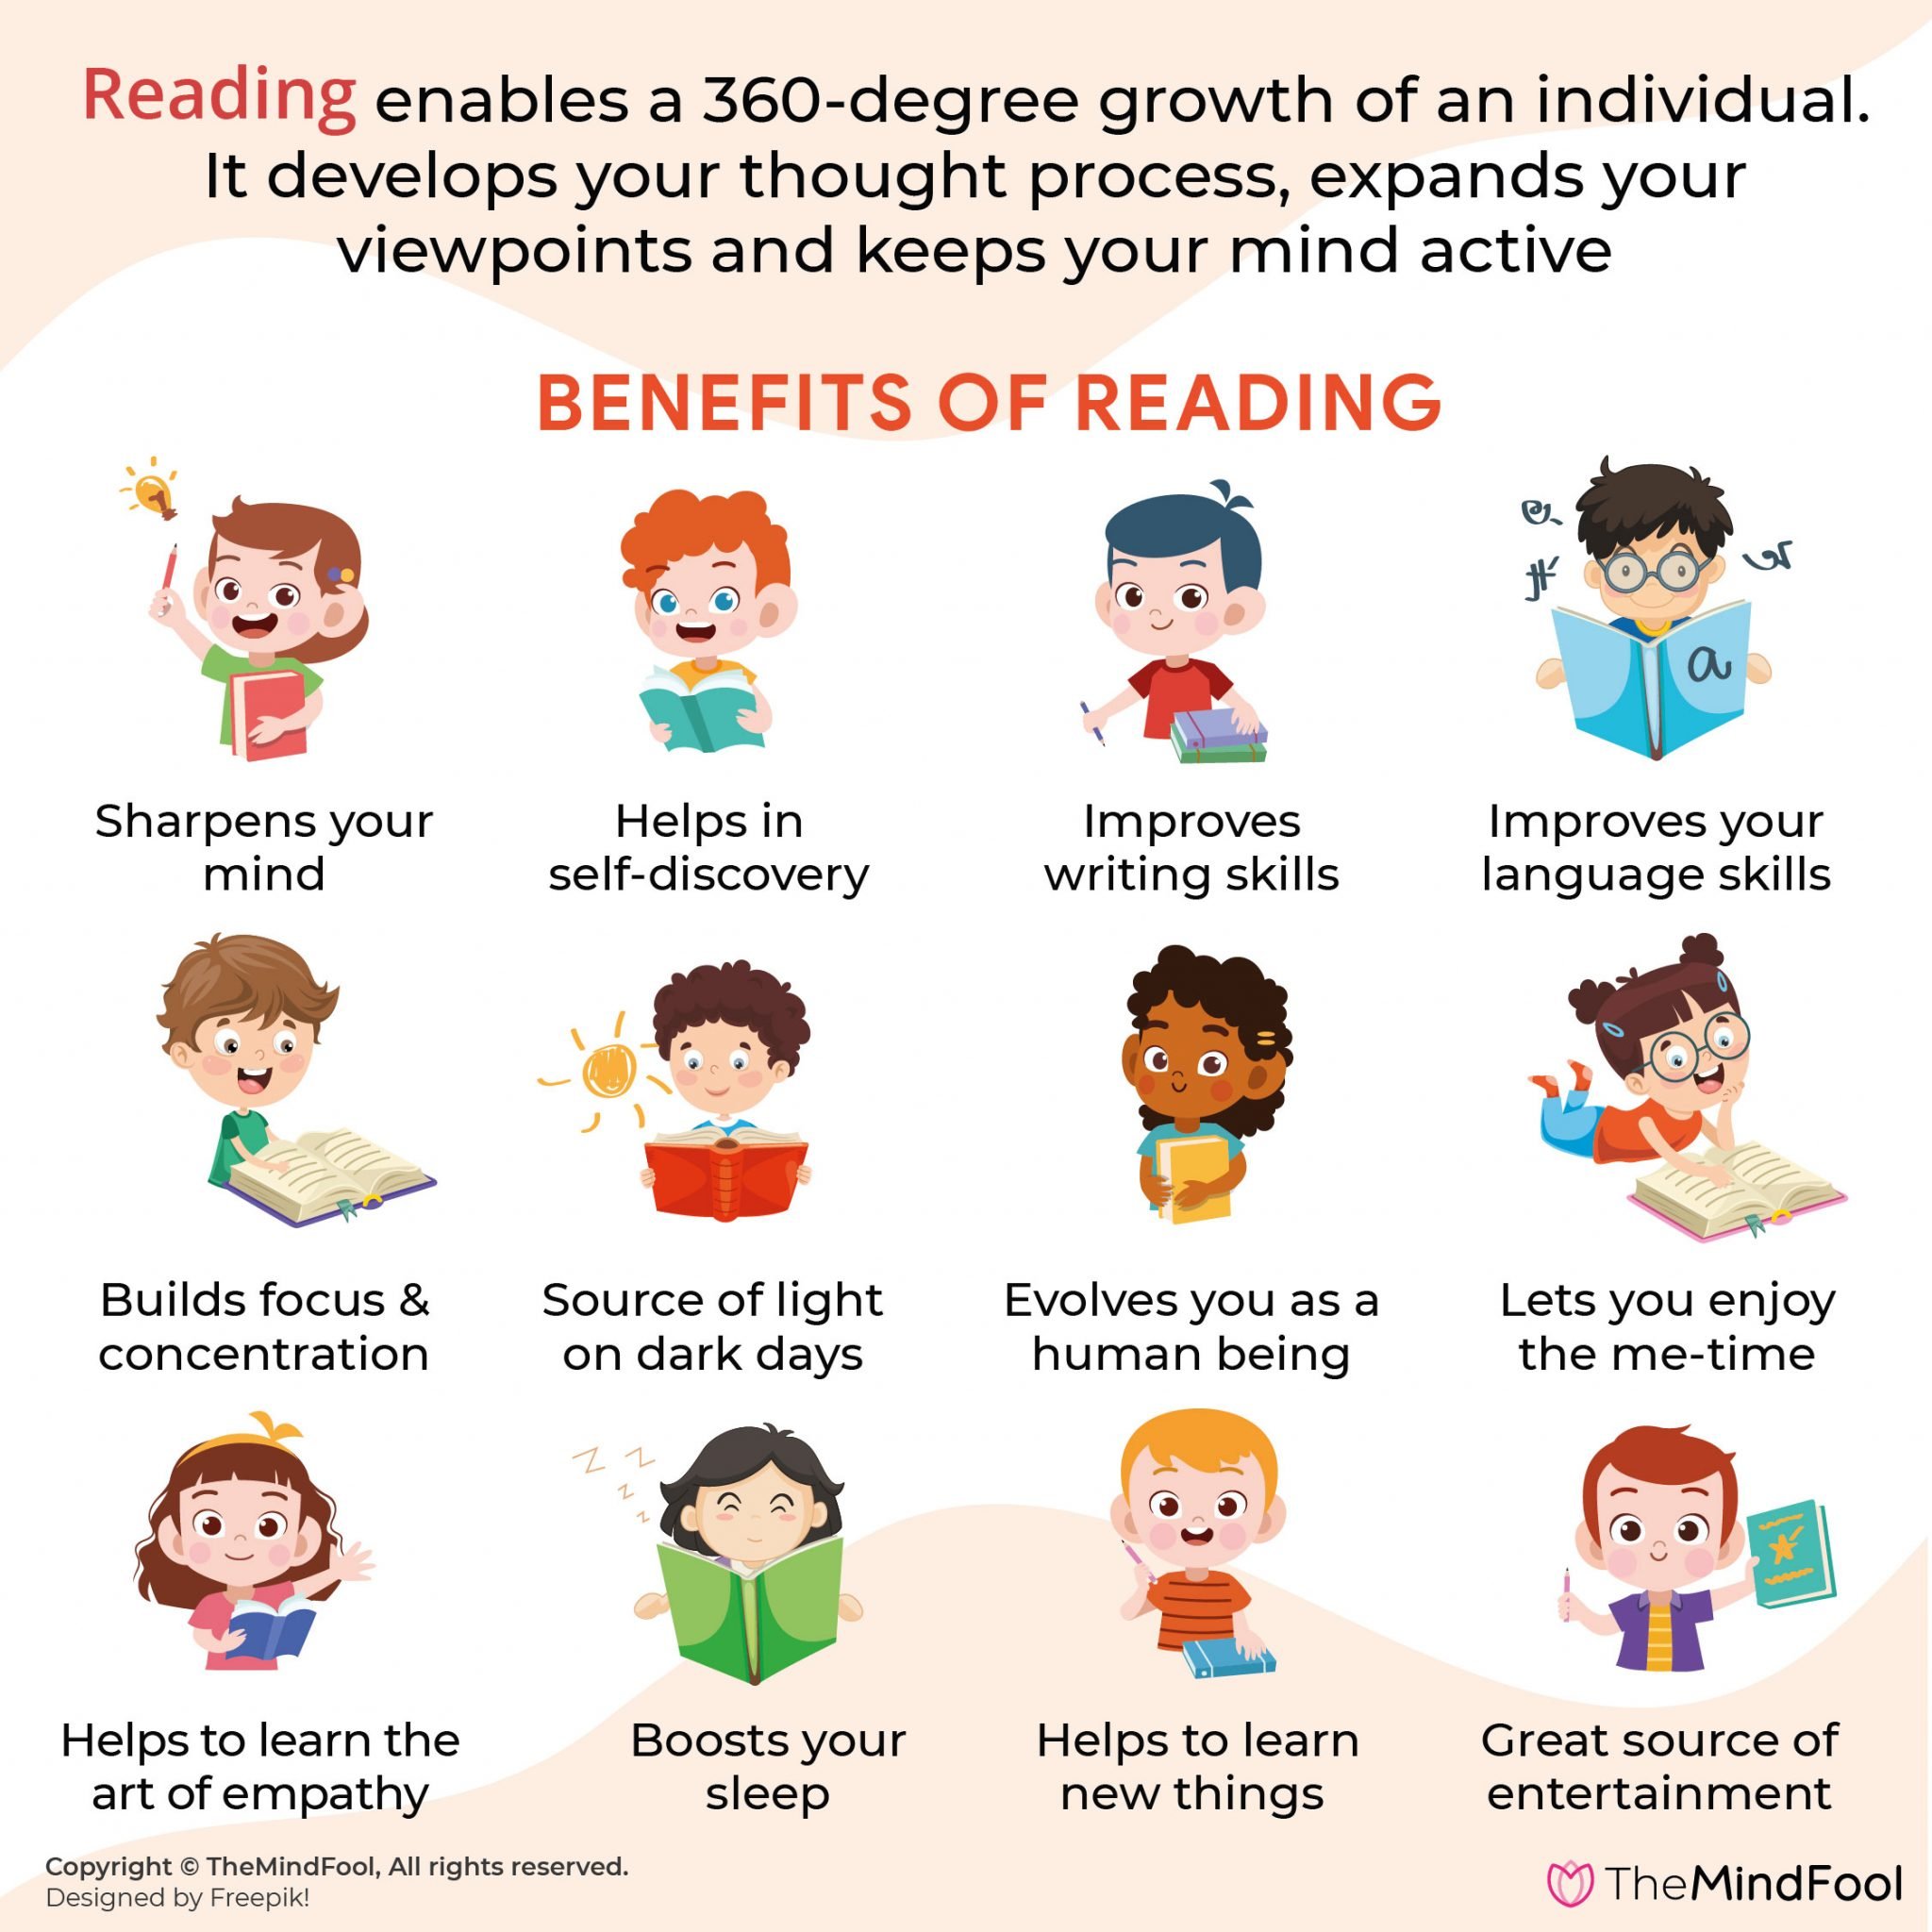 the benefits of reading book essay